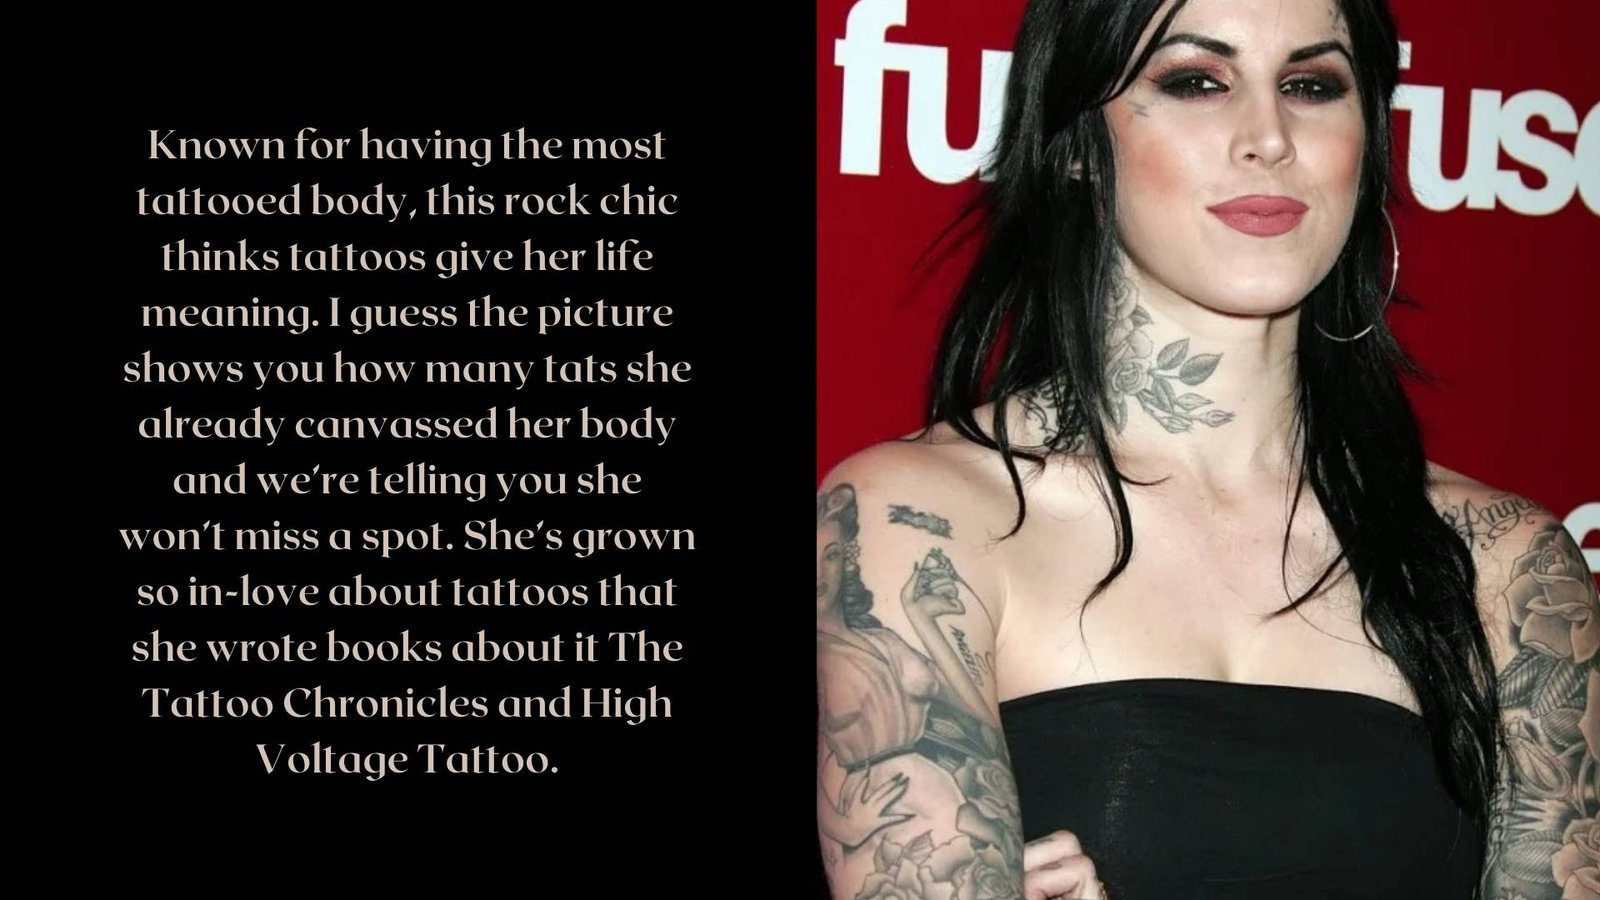 Kat Von D’s Tattoos & Their Meanings